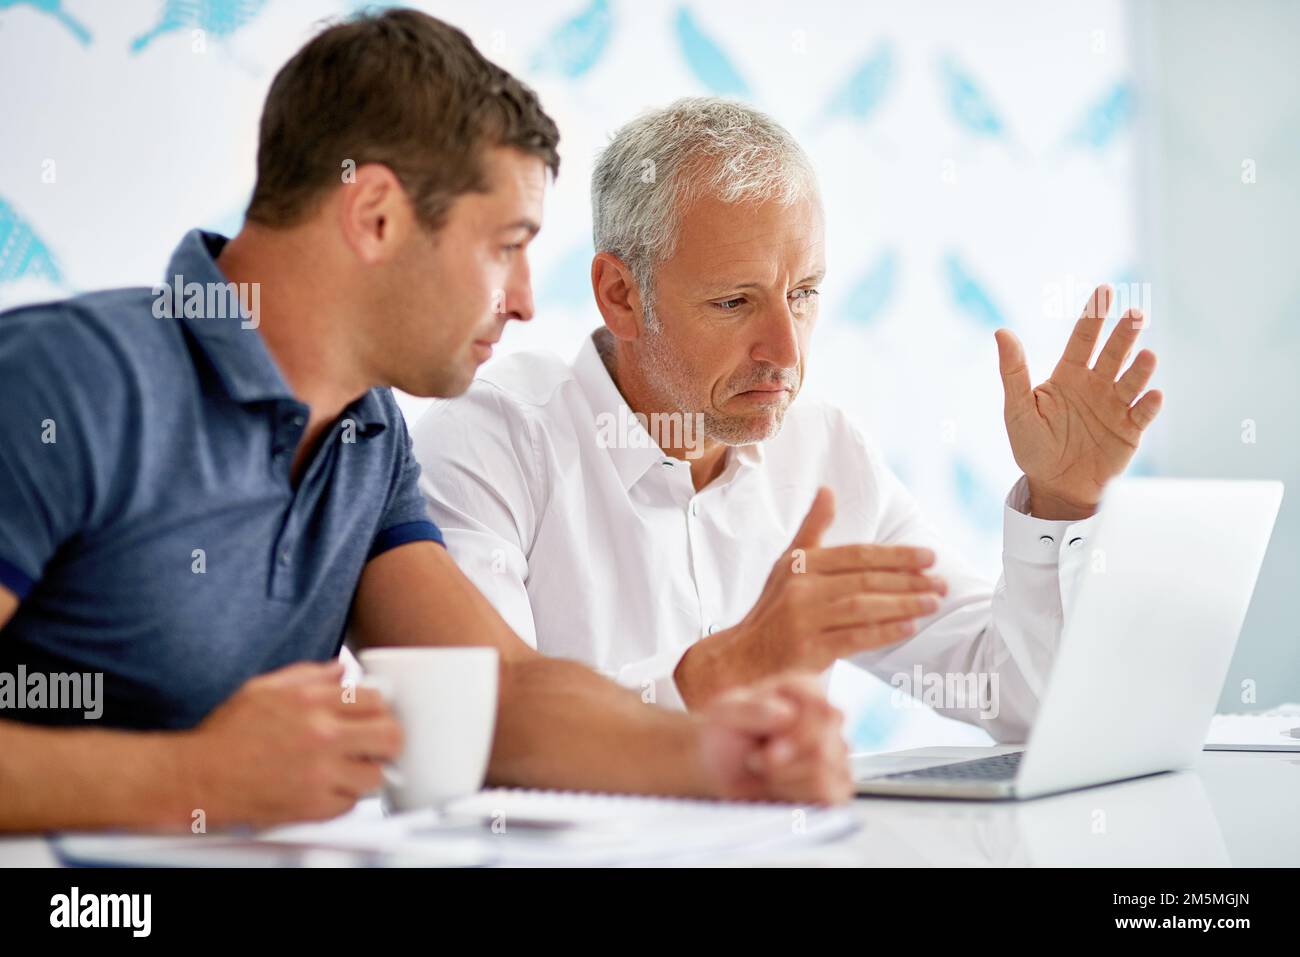 Looking at the bigger picture. two men working in the office. Stock Photo